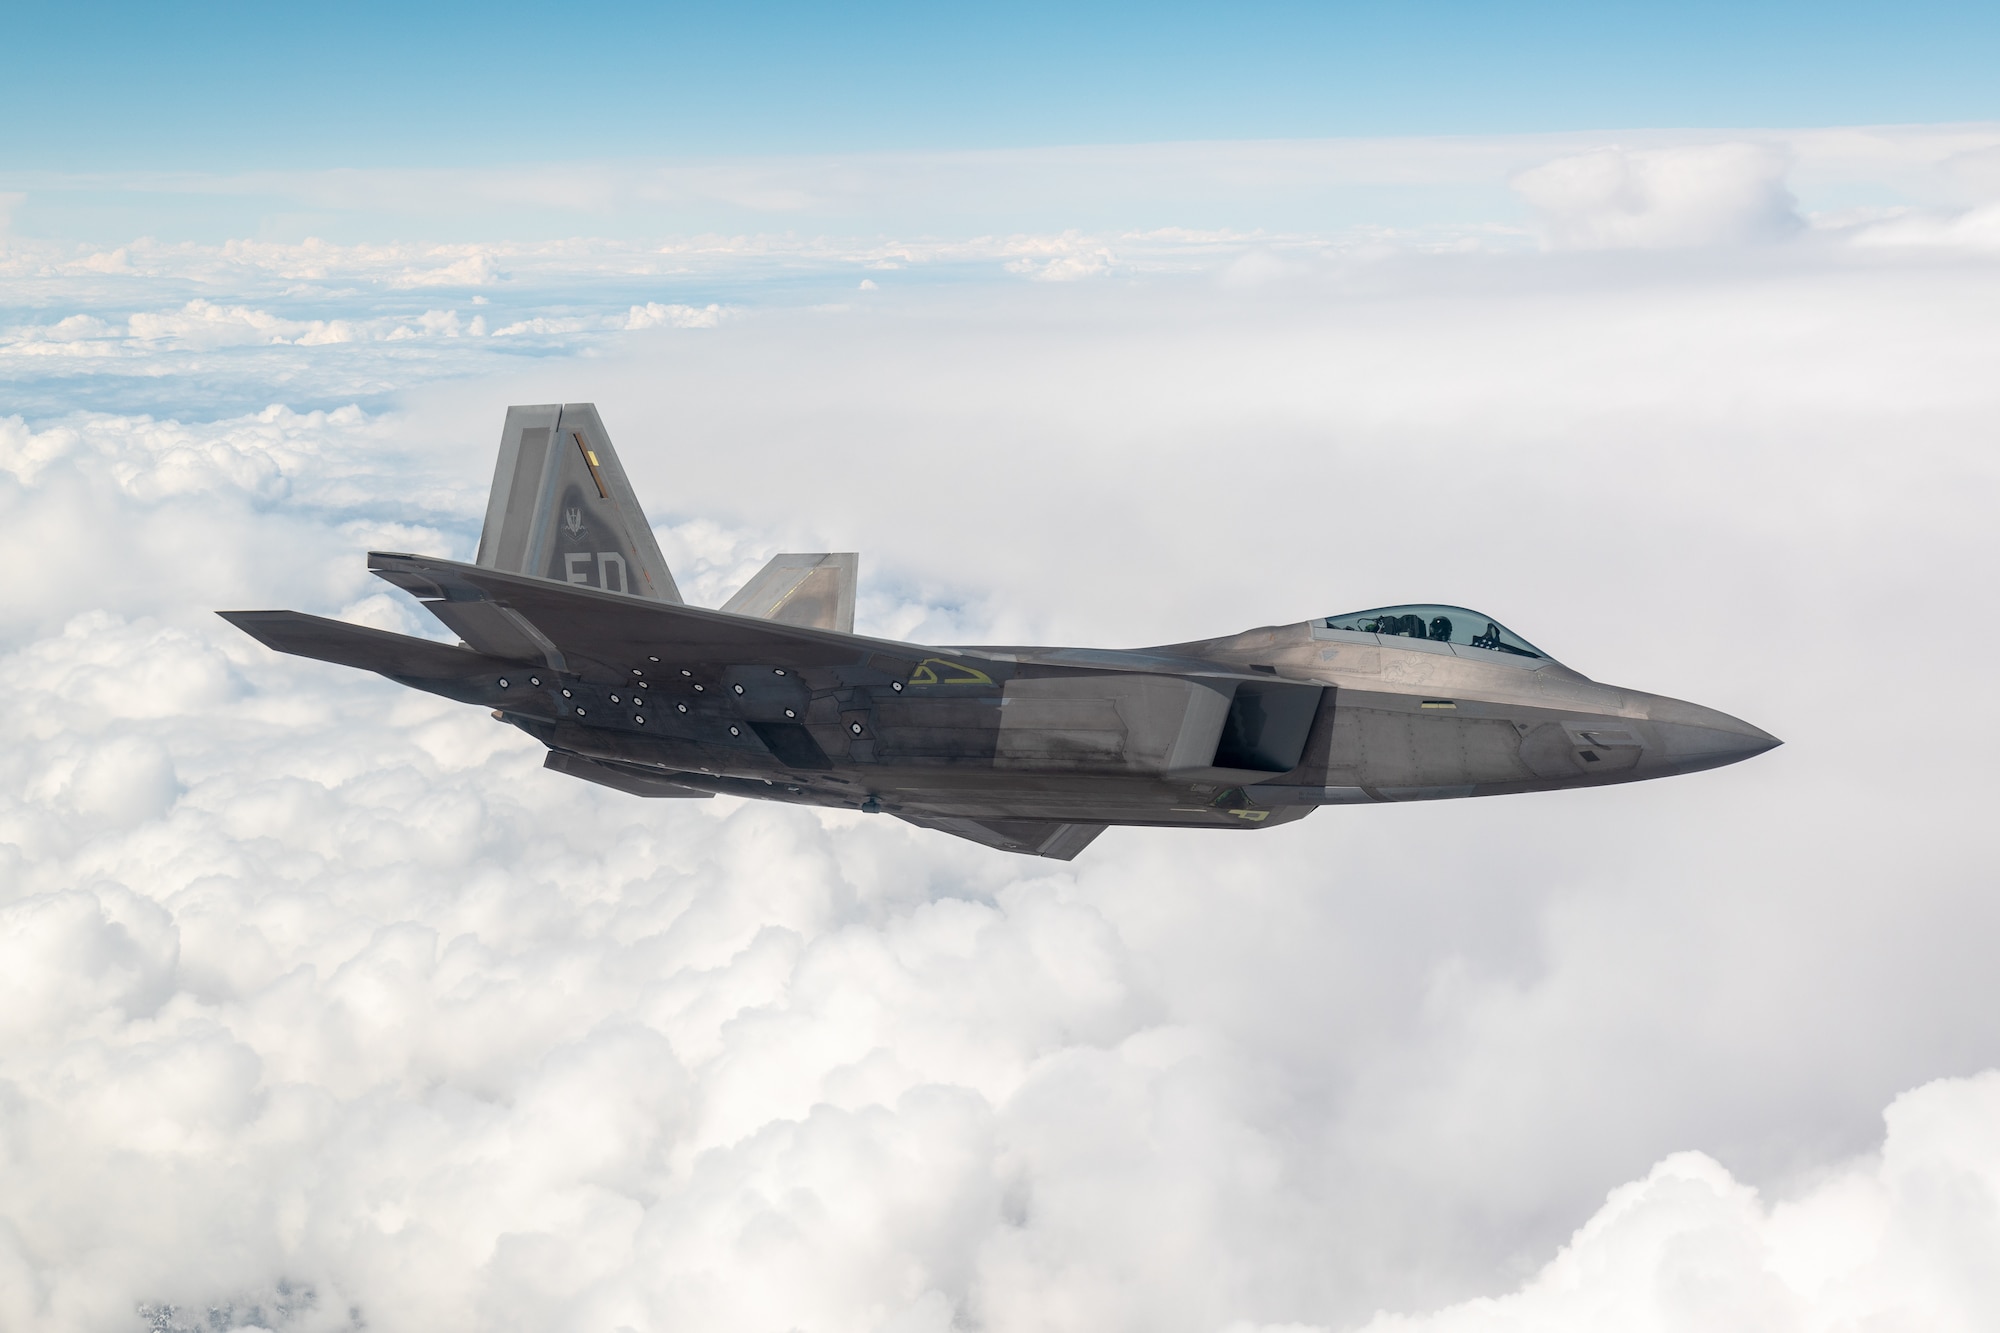 An F-22 Raptor flies above the clouds March 11, 2021. (Photo by Kyle Larson, Lockheed Martin)